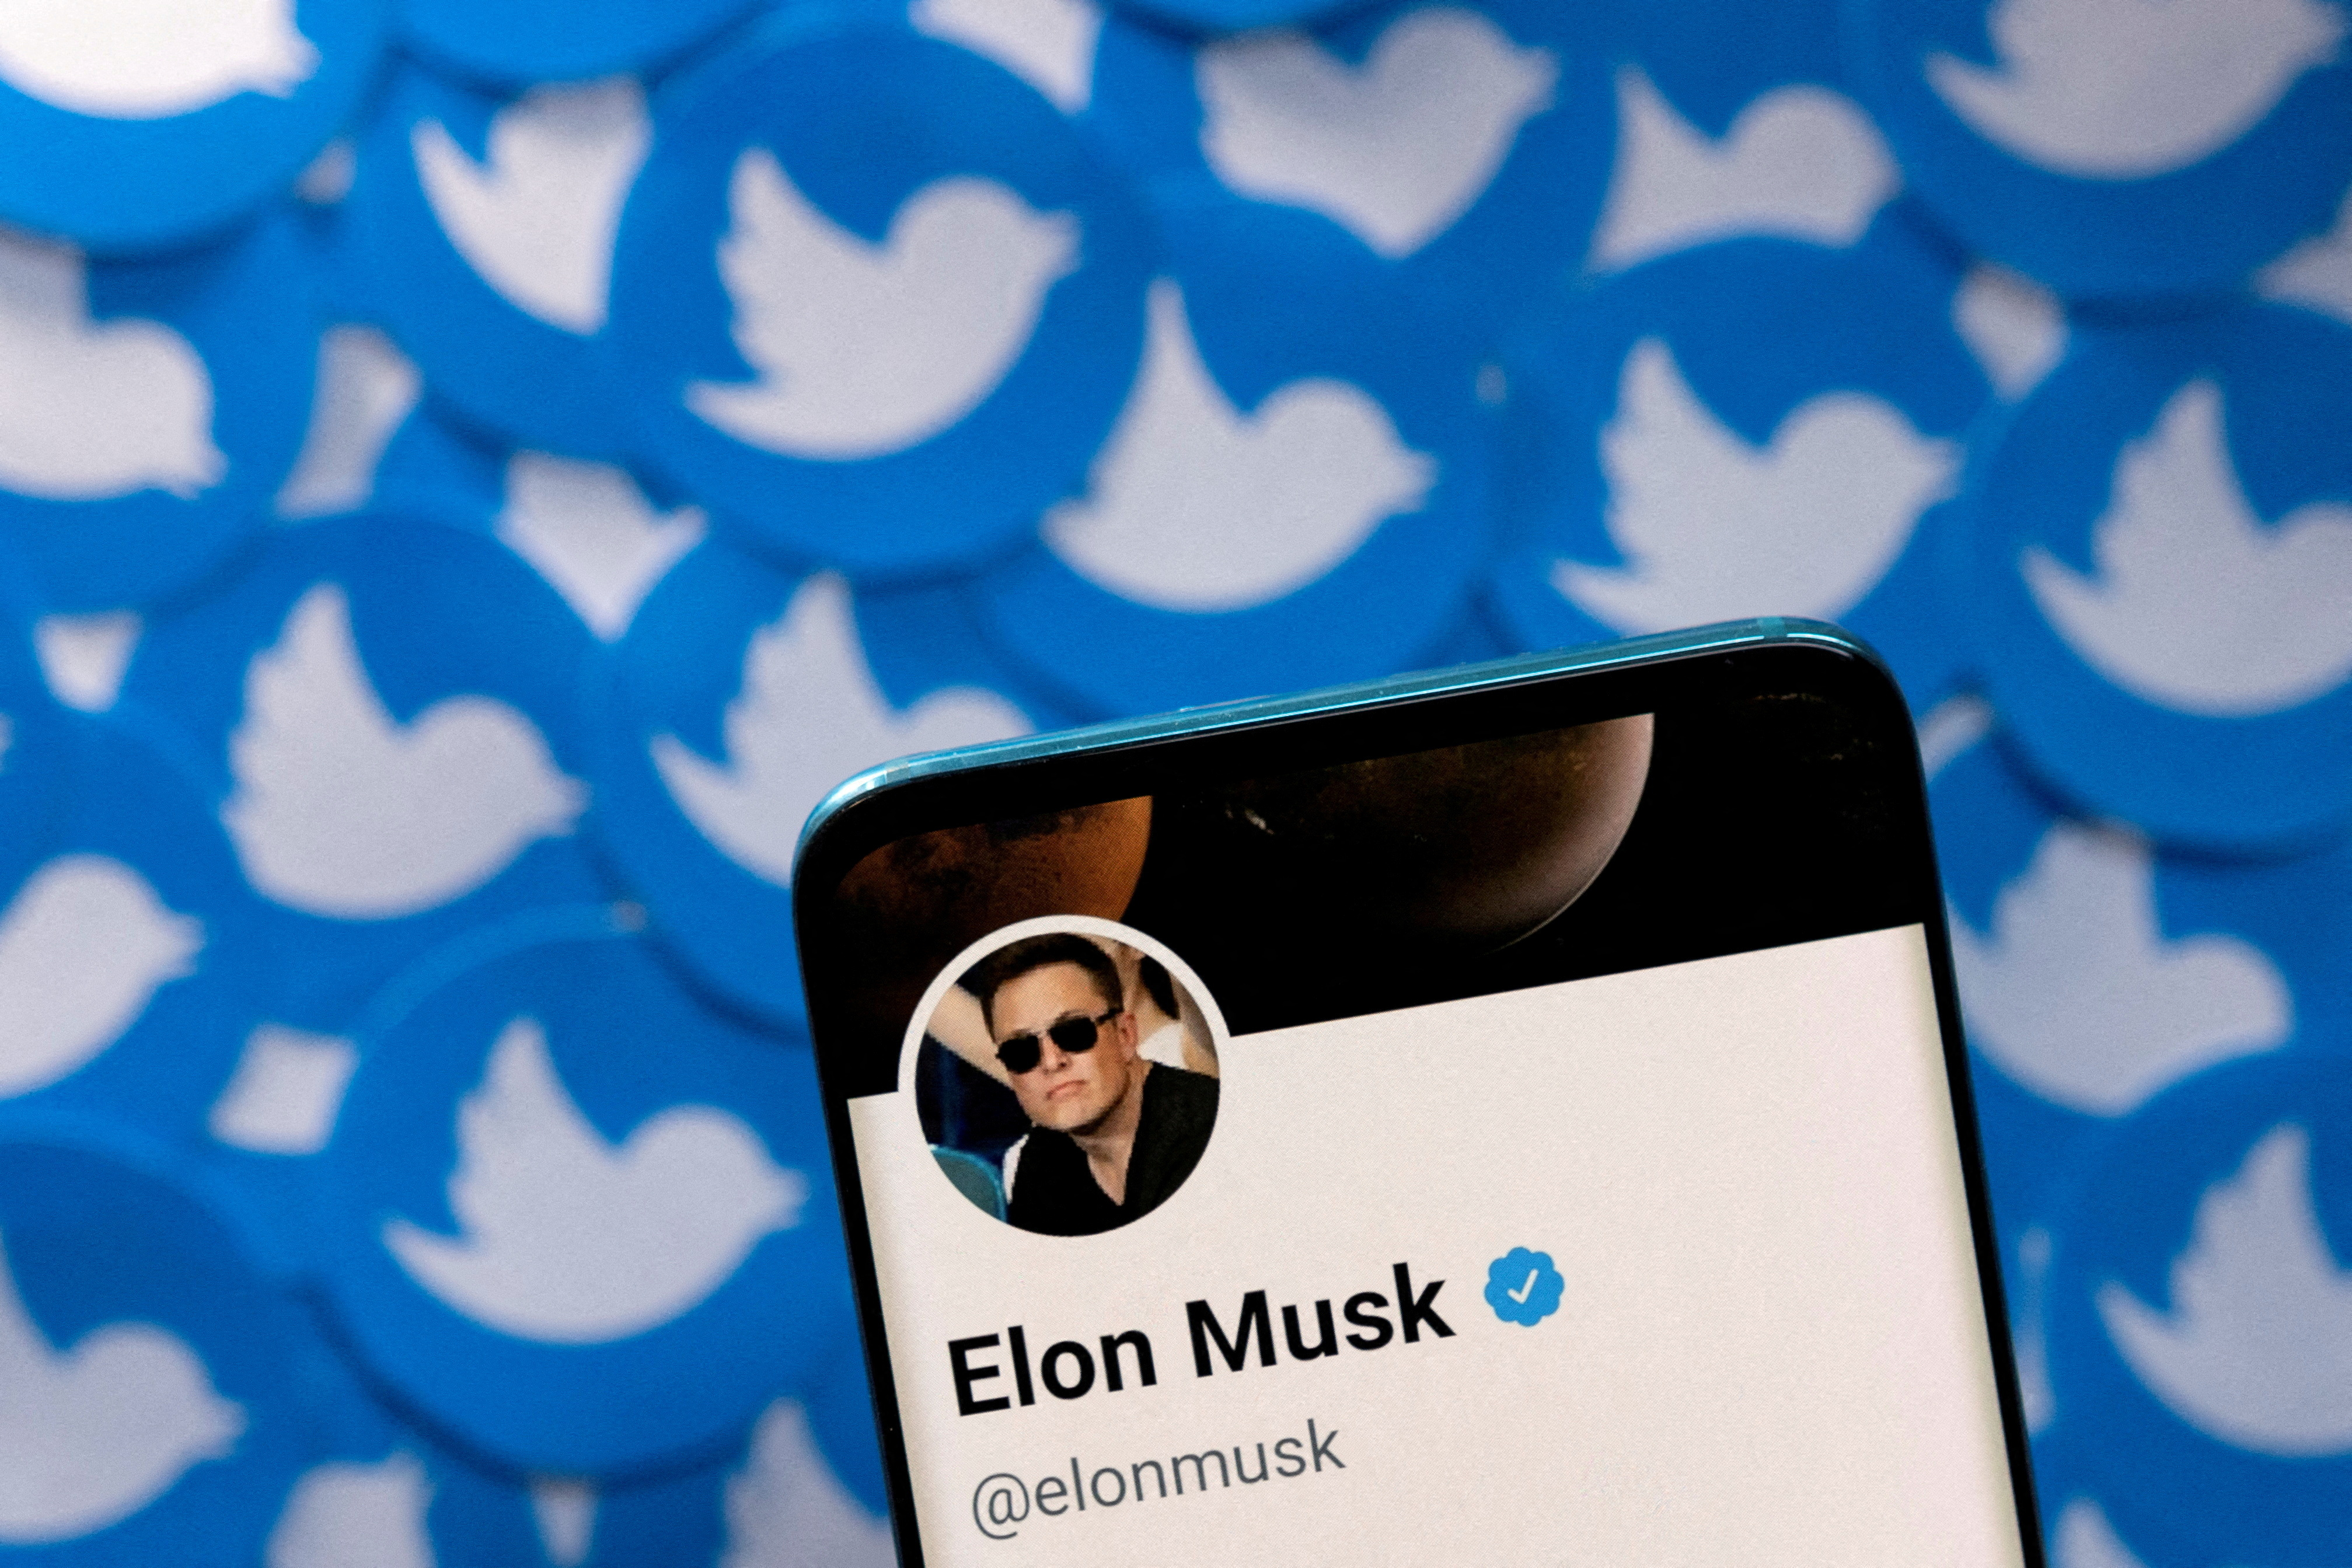 Illustration showing Elon Musk's Twitter profile on a smartphone and printed Twitter logos